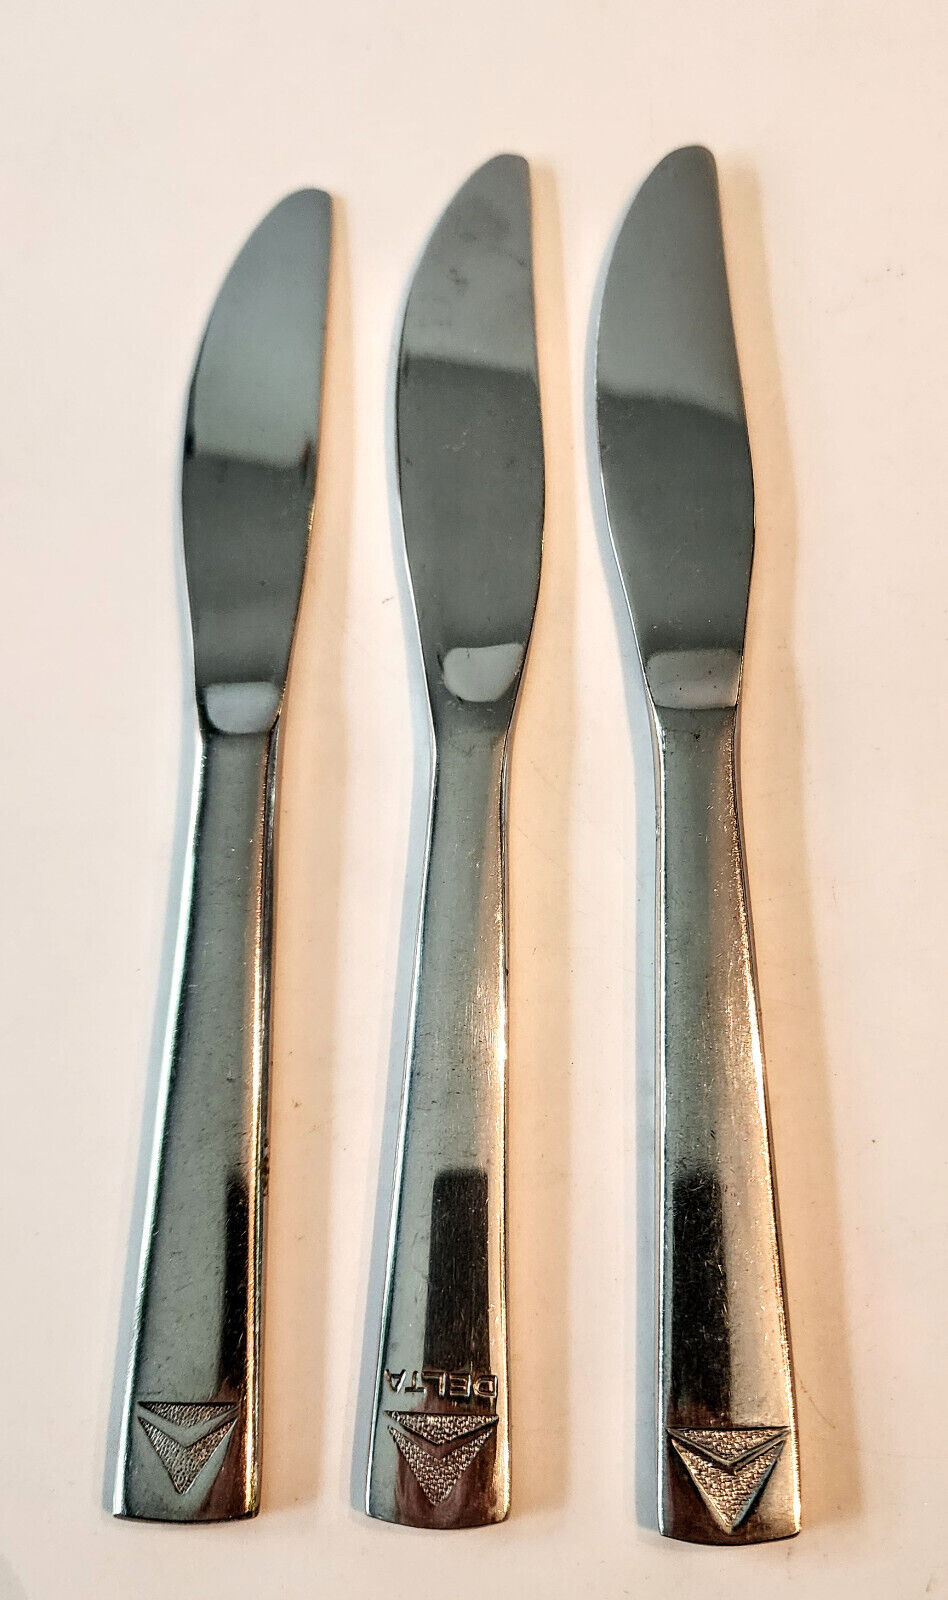 3 Vintage Delta Airlines Stainless Steel Flatware Dinner Knives by ABCO